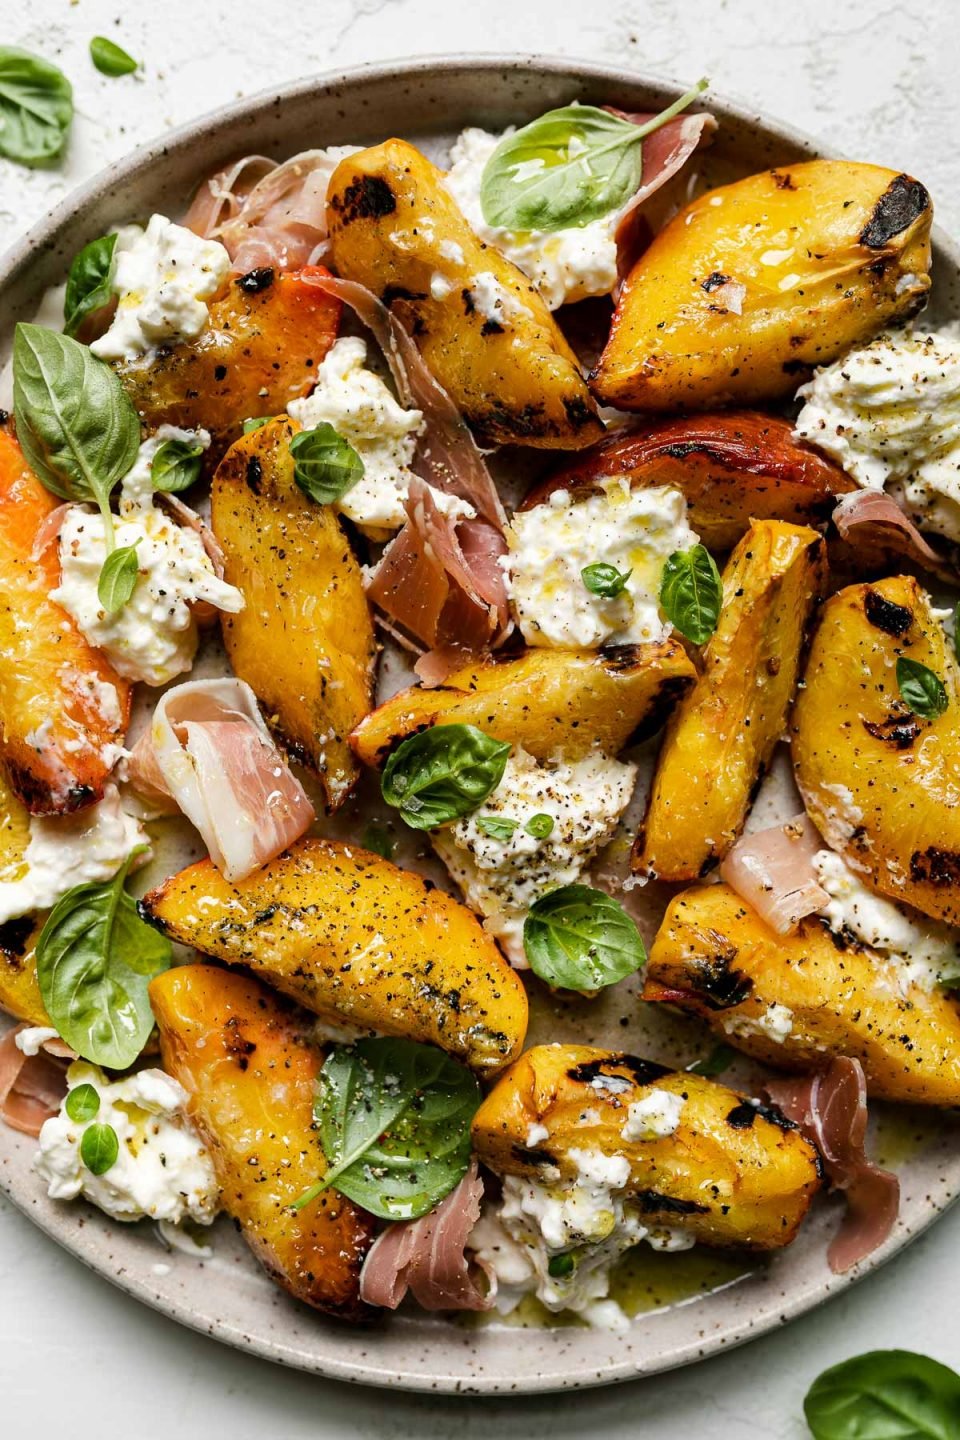 Grilled peaches, burrata cheese, fresh basil, & thinly sliced prosciutto arranged on a ceramic plate atop a textured white surface. Surrounding the grilled peach salad are fresh basil leaves.